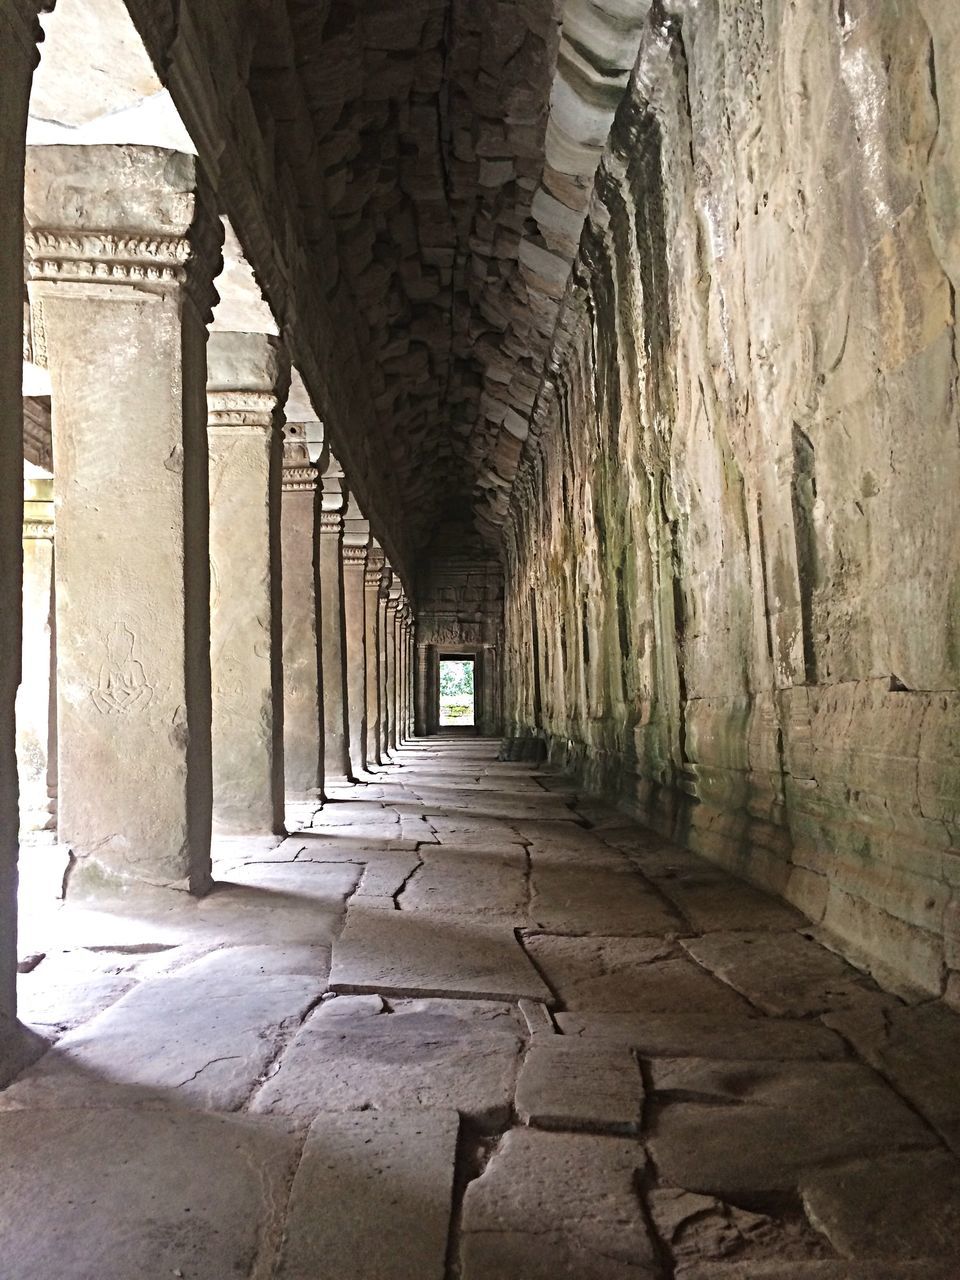 the way forward, architecture, built structure, indoors, diminishing perspective, corridor, vanishing point, architectural column, narrow, arch, wall - building feature, tunnel, old, building, empty, ceiling, walkway, column, colonnade, sunlight